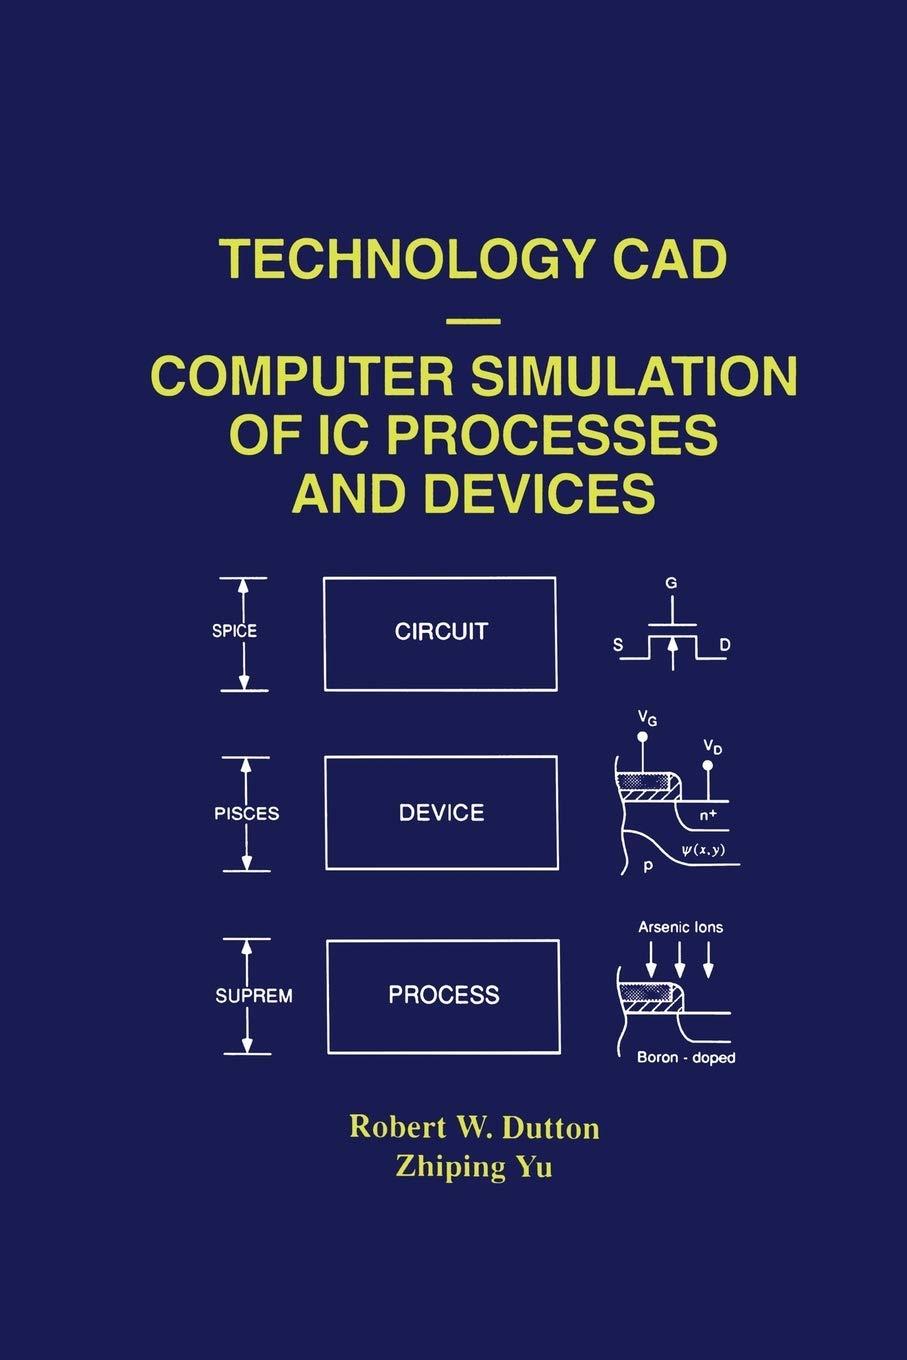 technology cad computer simulation of ic processes and devices 1993 edition robert w. dutton, zhiping yu